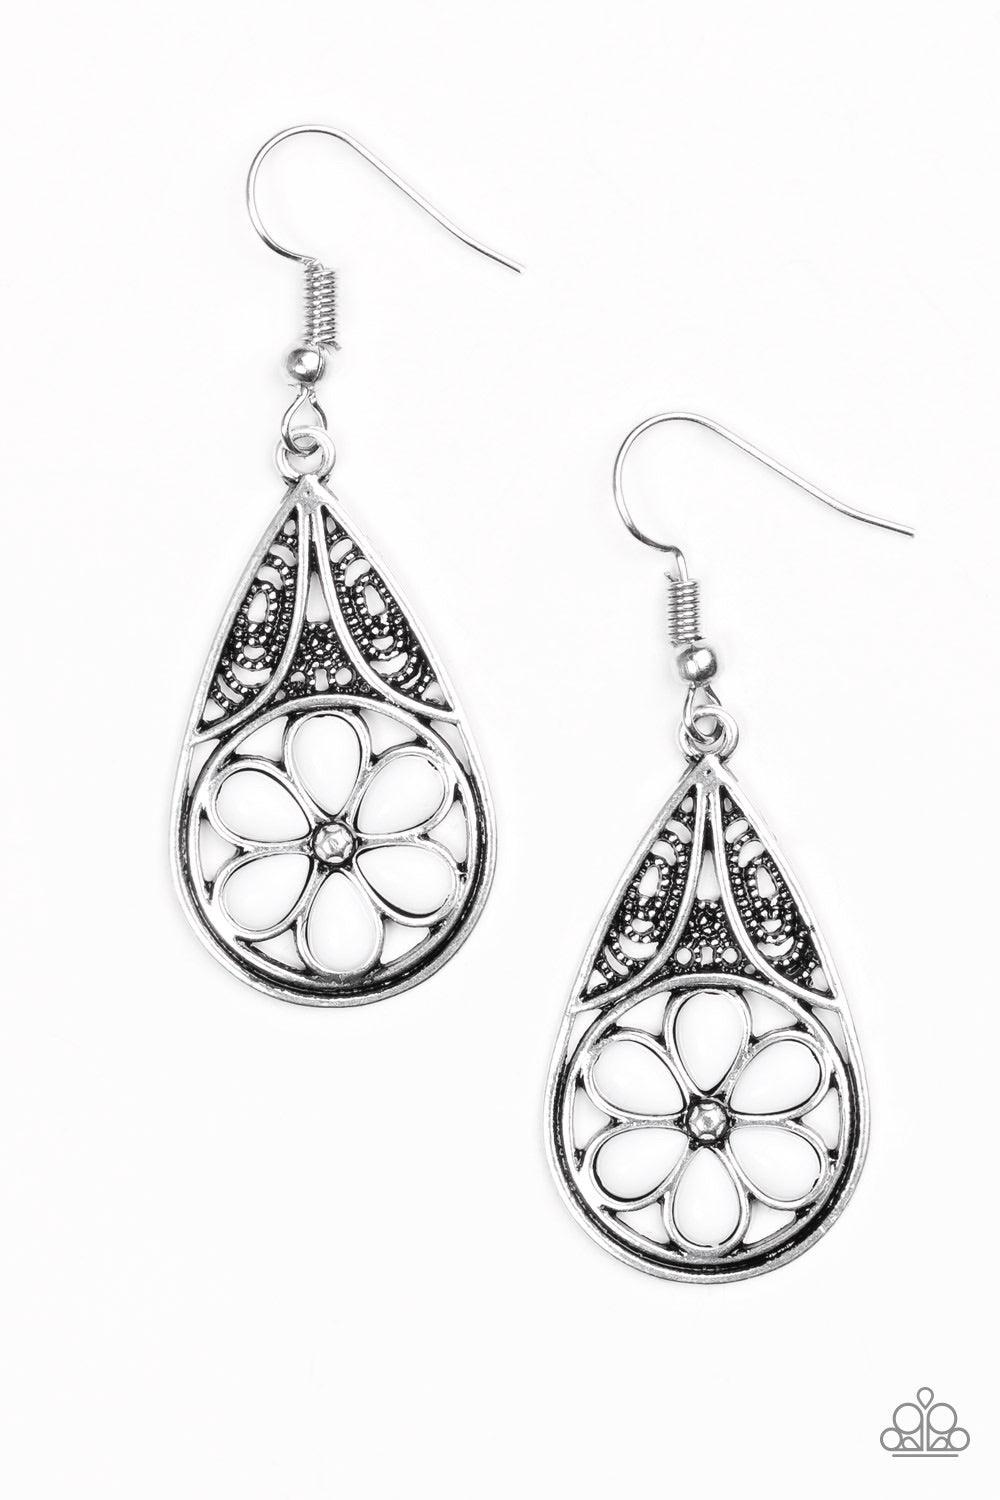 Paparazzi Accessories Countryside Cottage - White Refreshing white beads are pressed into the bottom of an ornate silver teardrop, creating a whimsical floral pattern. Earring attaches to a standard fishhook fitting. Jewelry